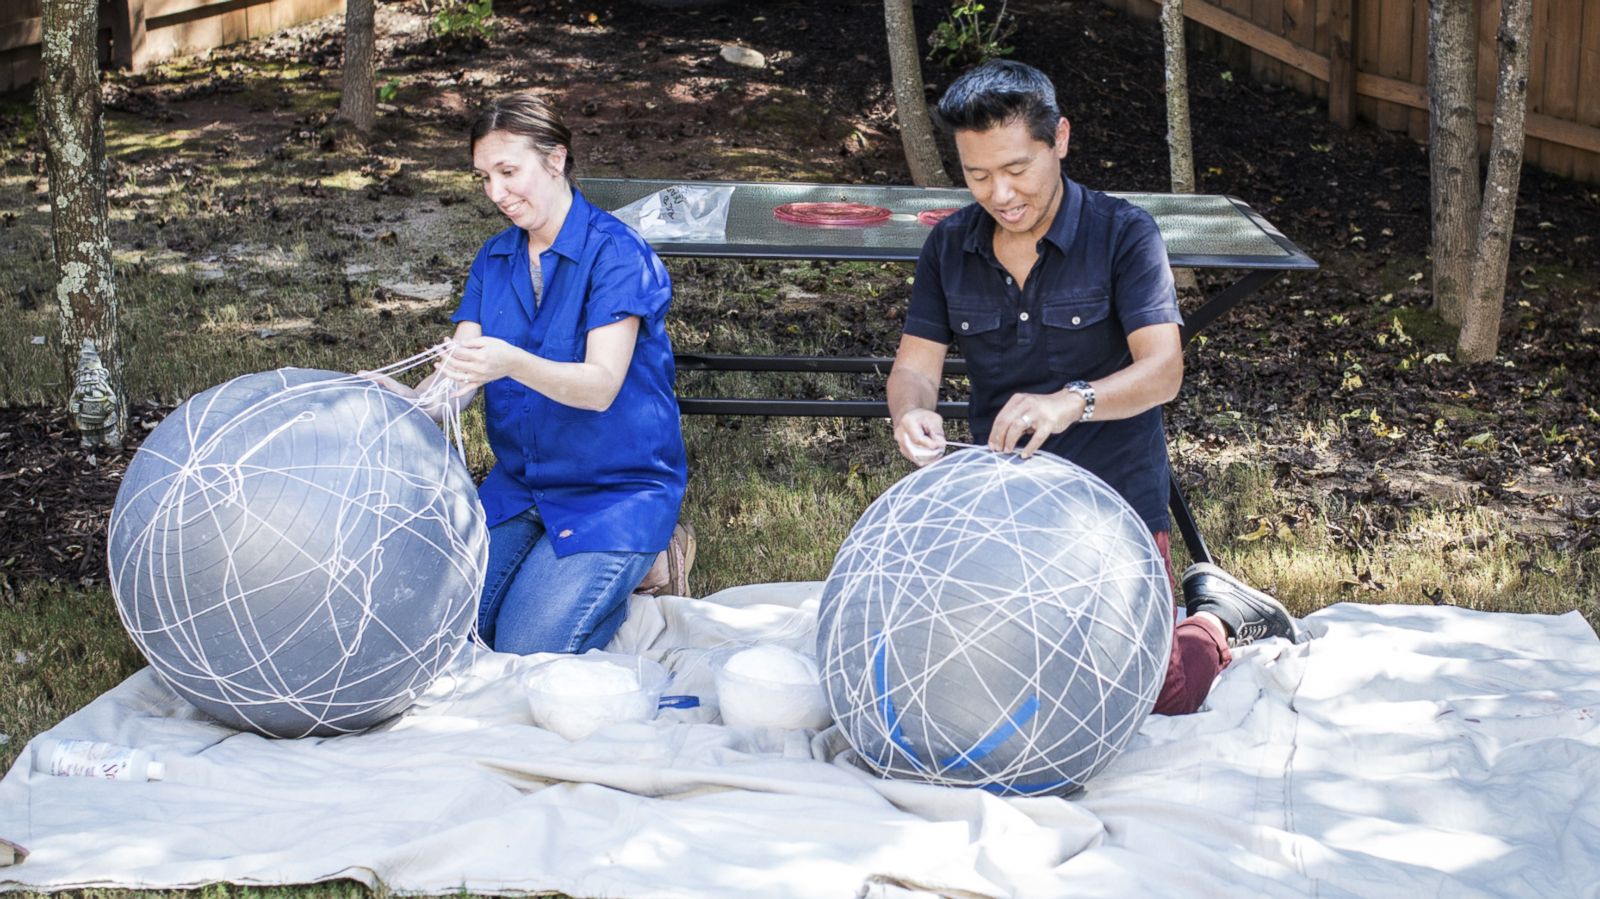 PHOTO: Vern Yip works alongside a homeowner on "Trading Spaces."